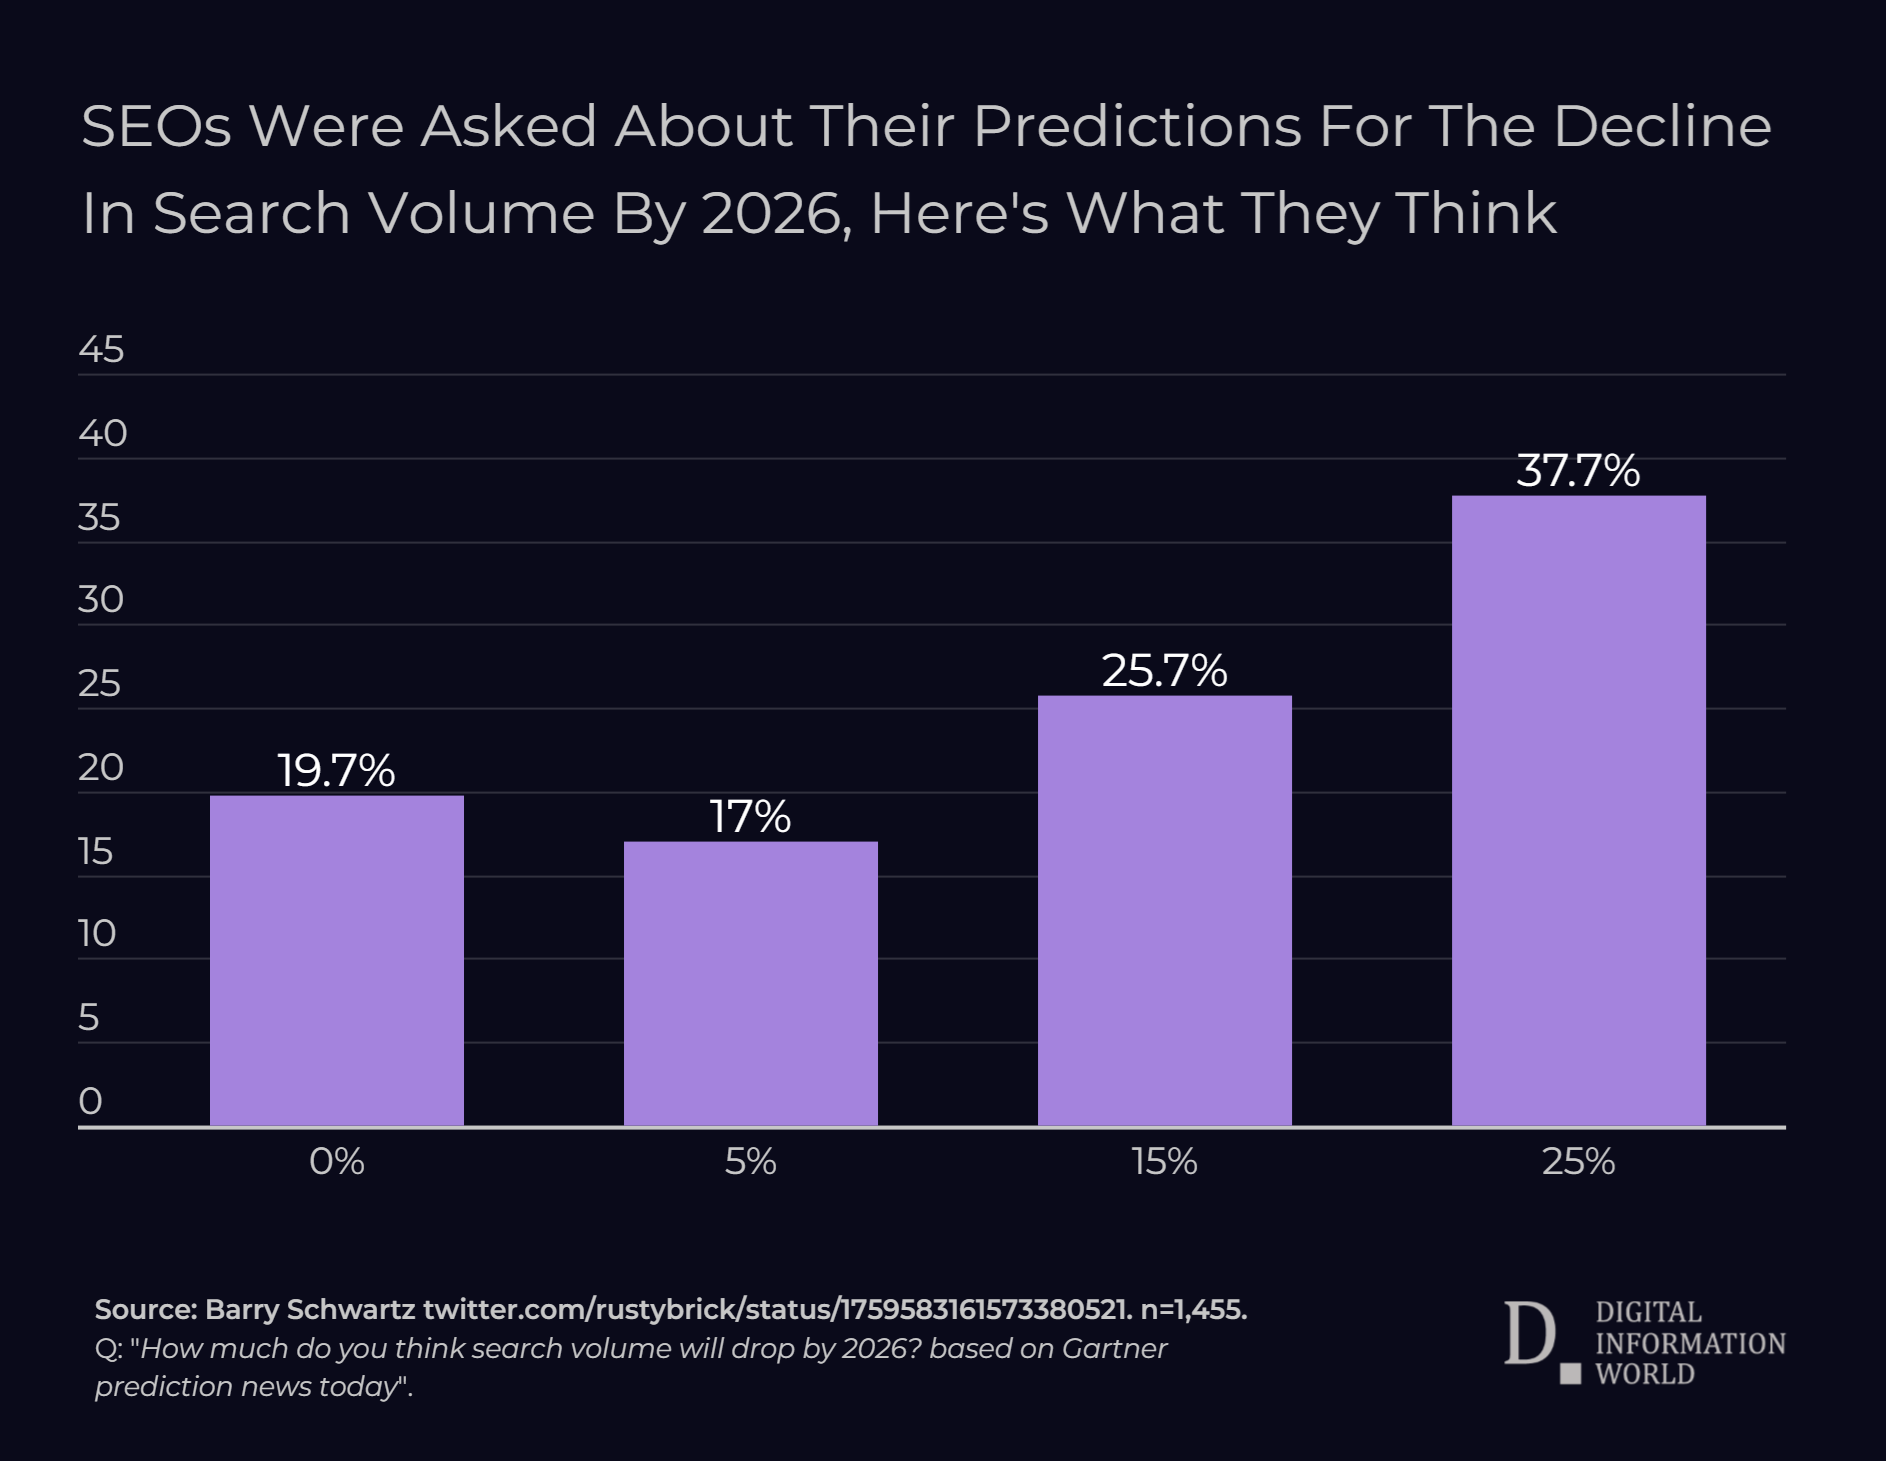 Barry Schwartz's survey with 1,455 votes finds 37.7% of SEO professionals foresee a 25% or more decline in search volume.